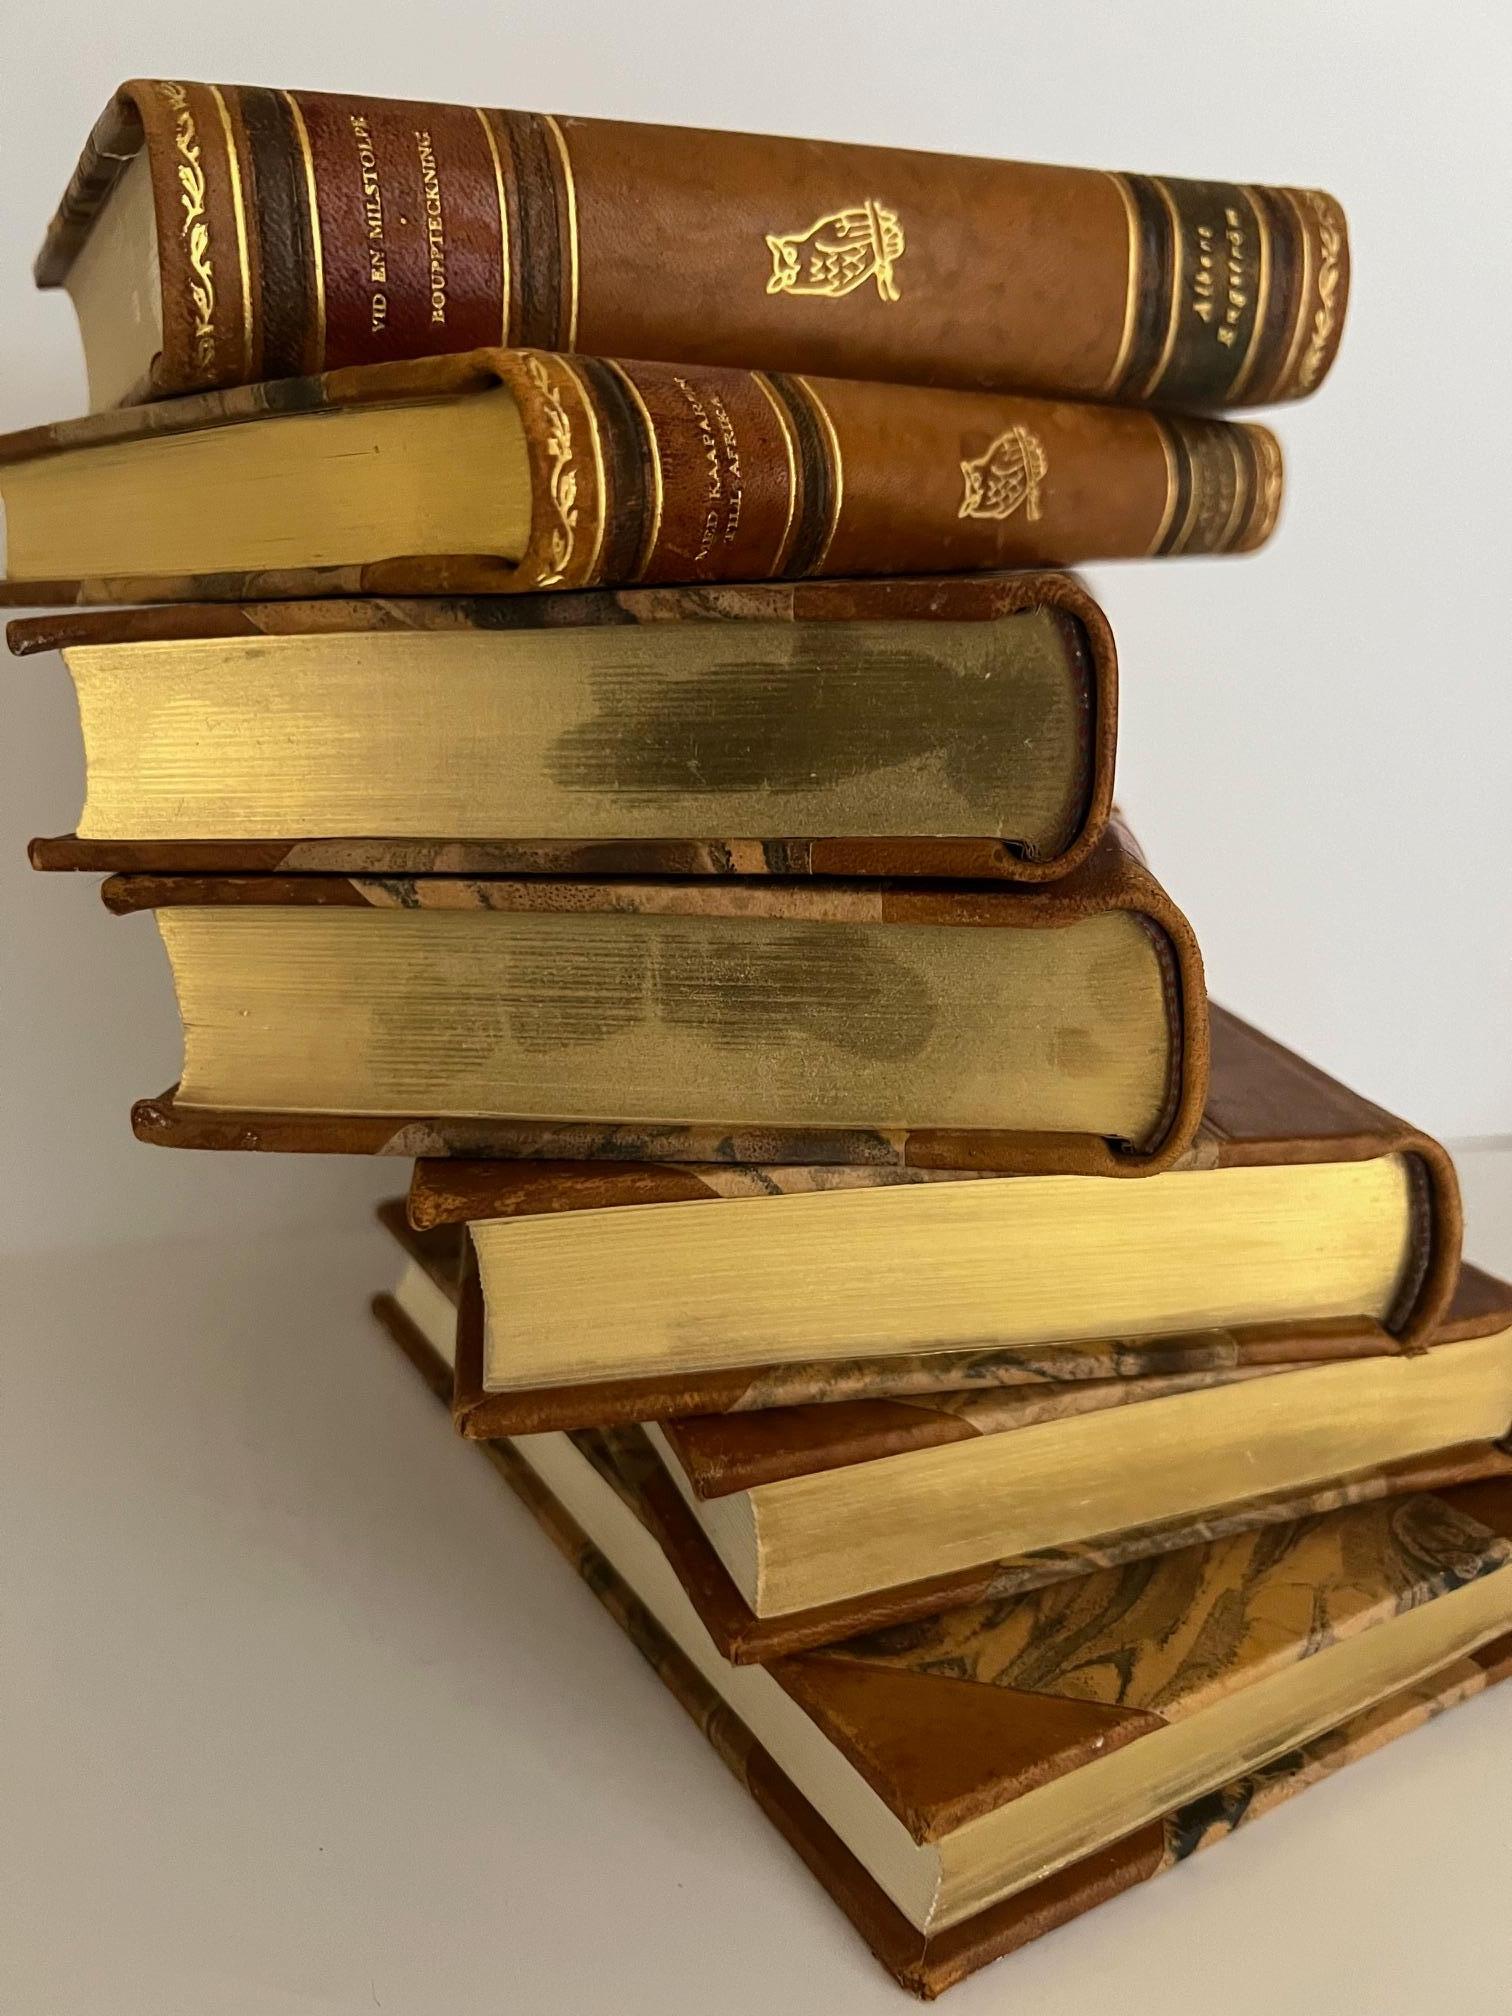 Albert Engstrom Leather & Gilt Swedish Book Set, C. 1945 In Good Condition For Sale In Ross, CA